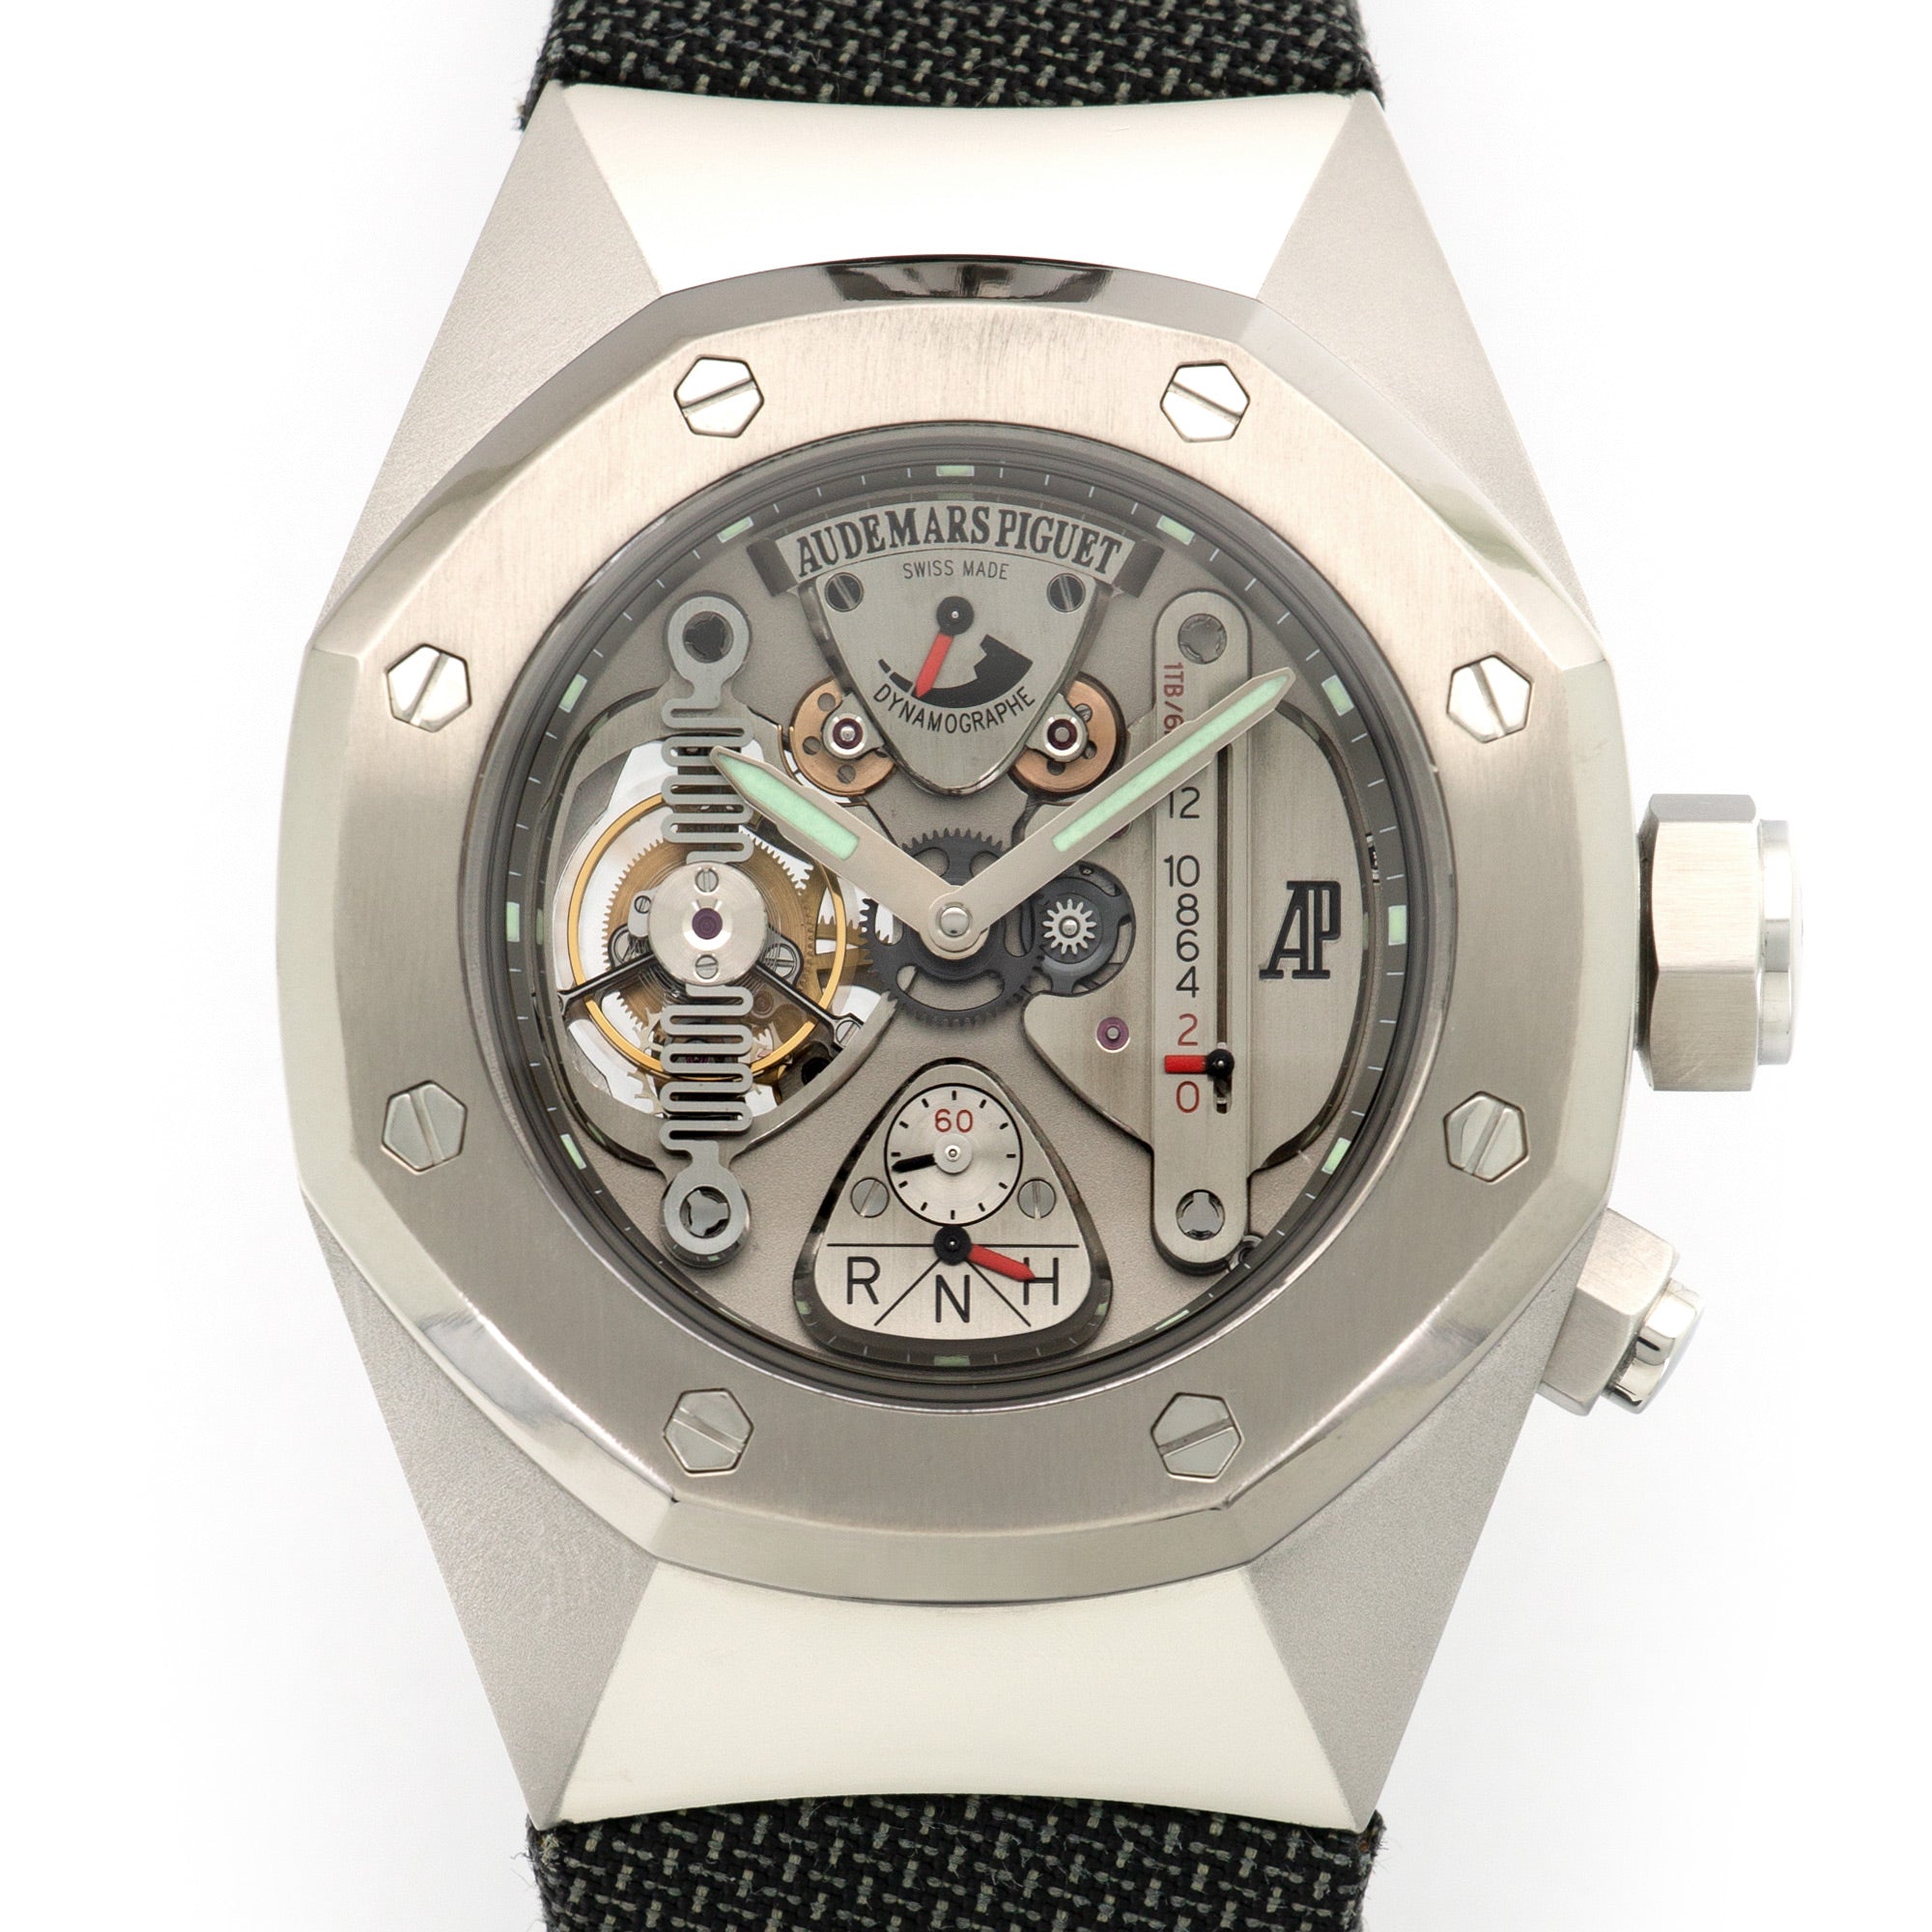 Swatch Group, Allied With Audemars Piguet, Announces Sophisticated  Nivachron Technology